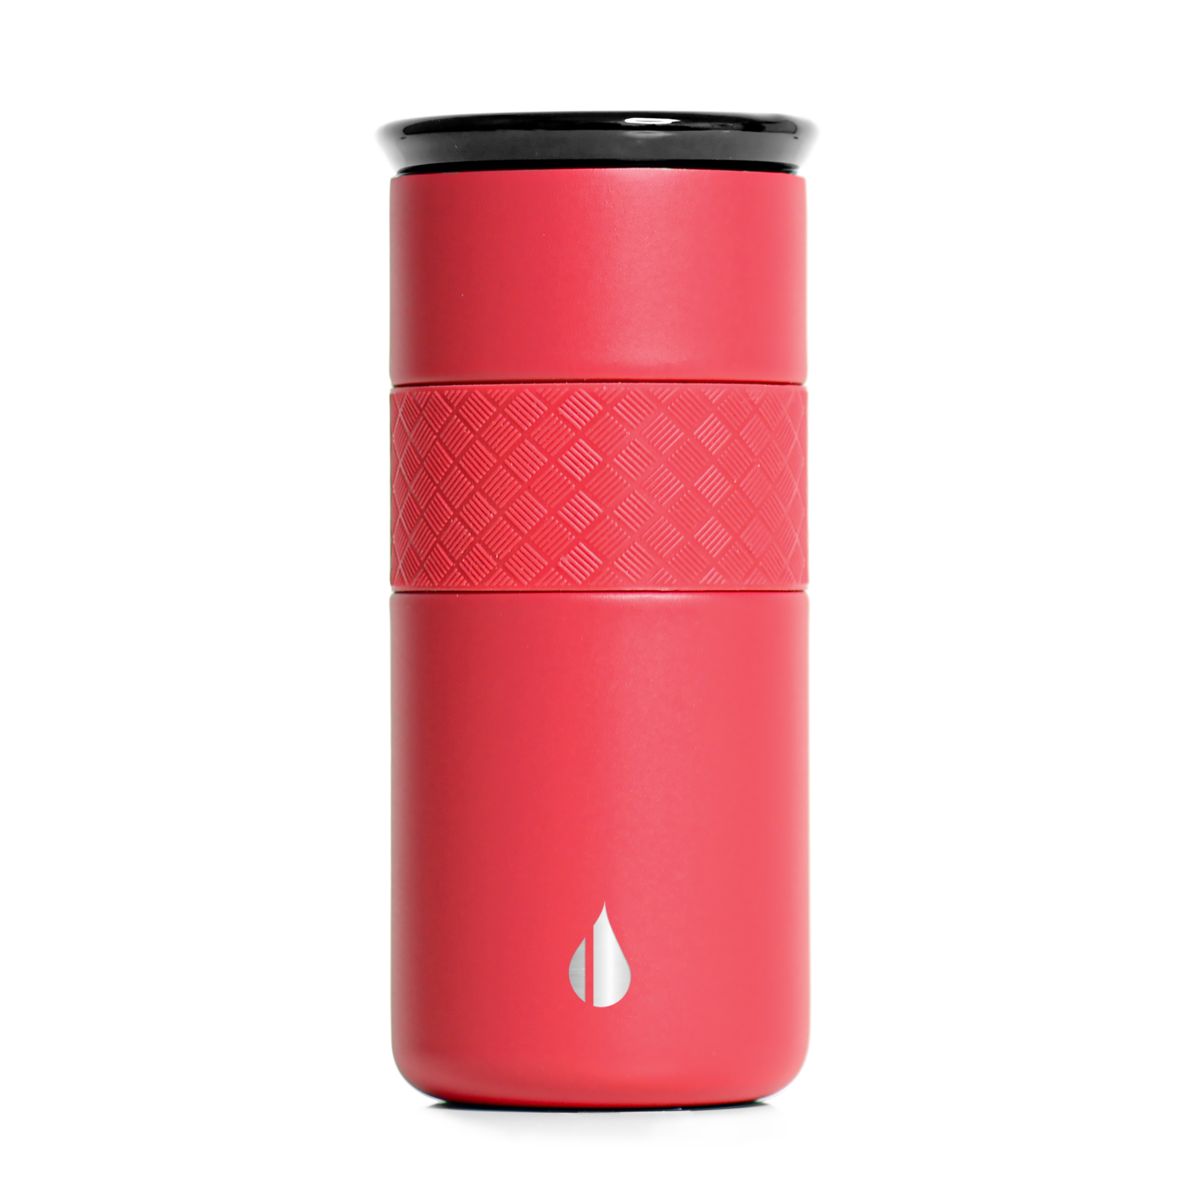 Elemental® 16 oz Artisan Stainless Steel Tumbler with Ceramic Lid in red